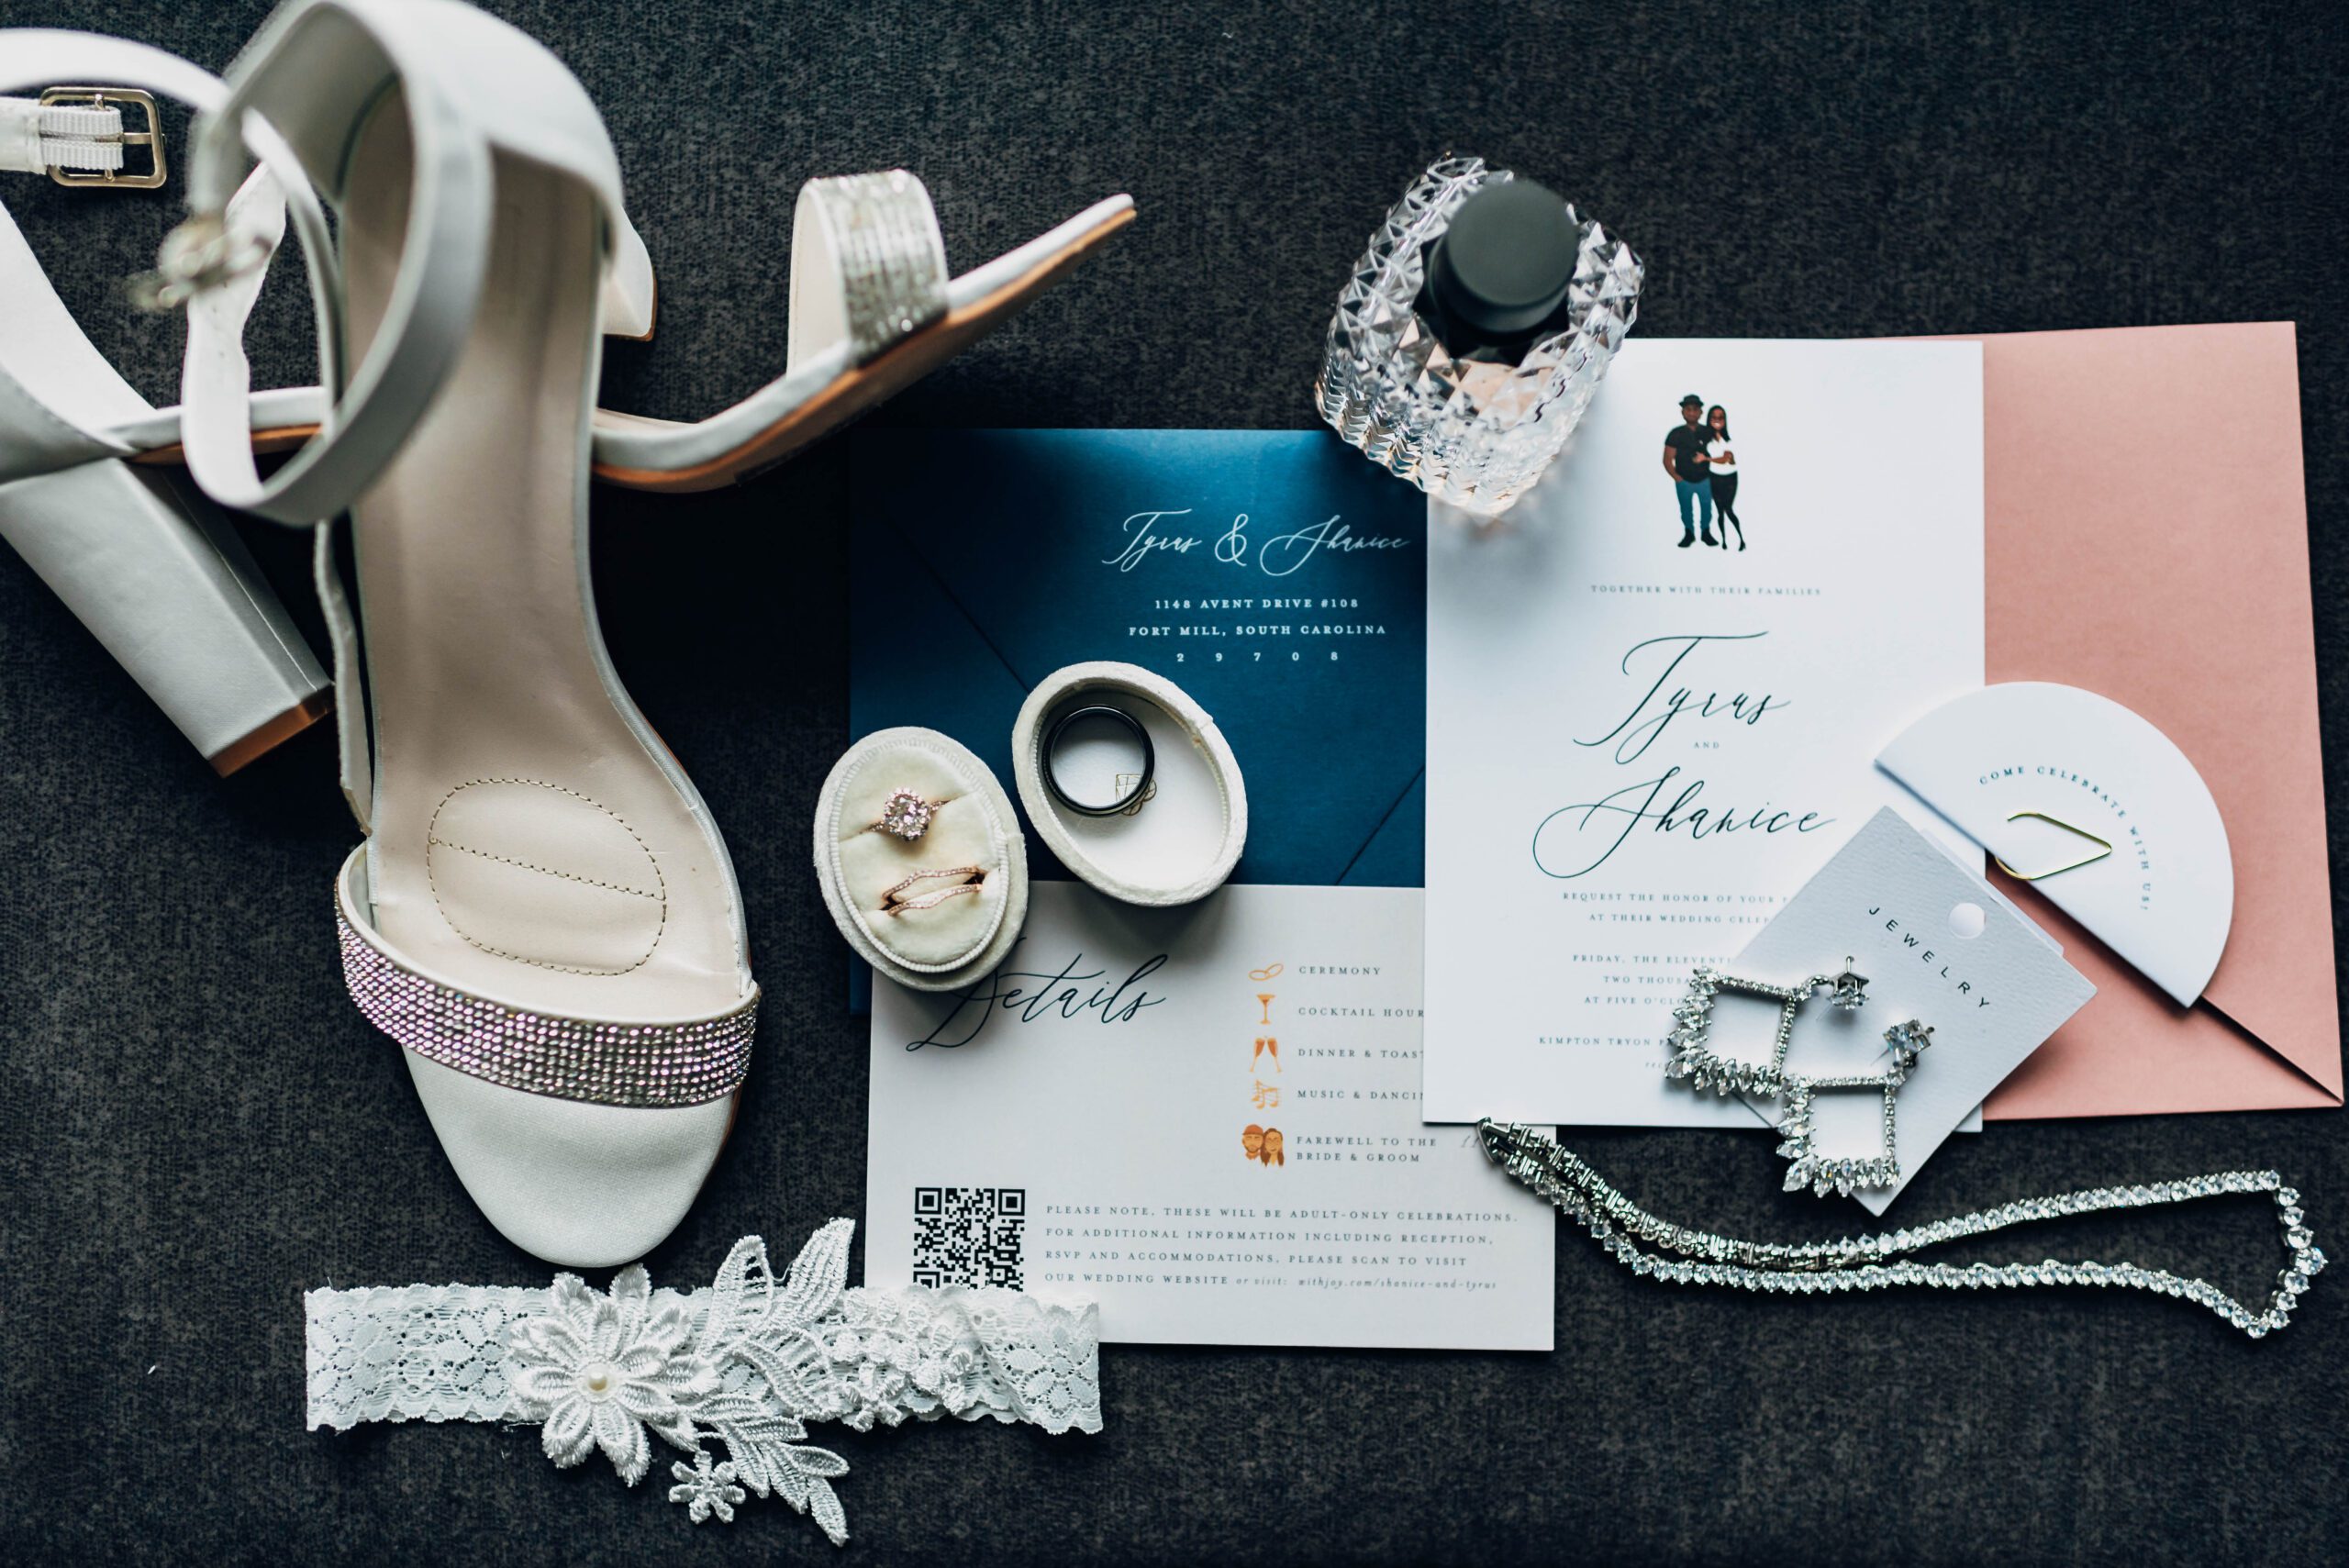 Wedding flat lay including perfume, shoes, wedding invitations with caricature, rings, garter, necklace, earrings, and envelope